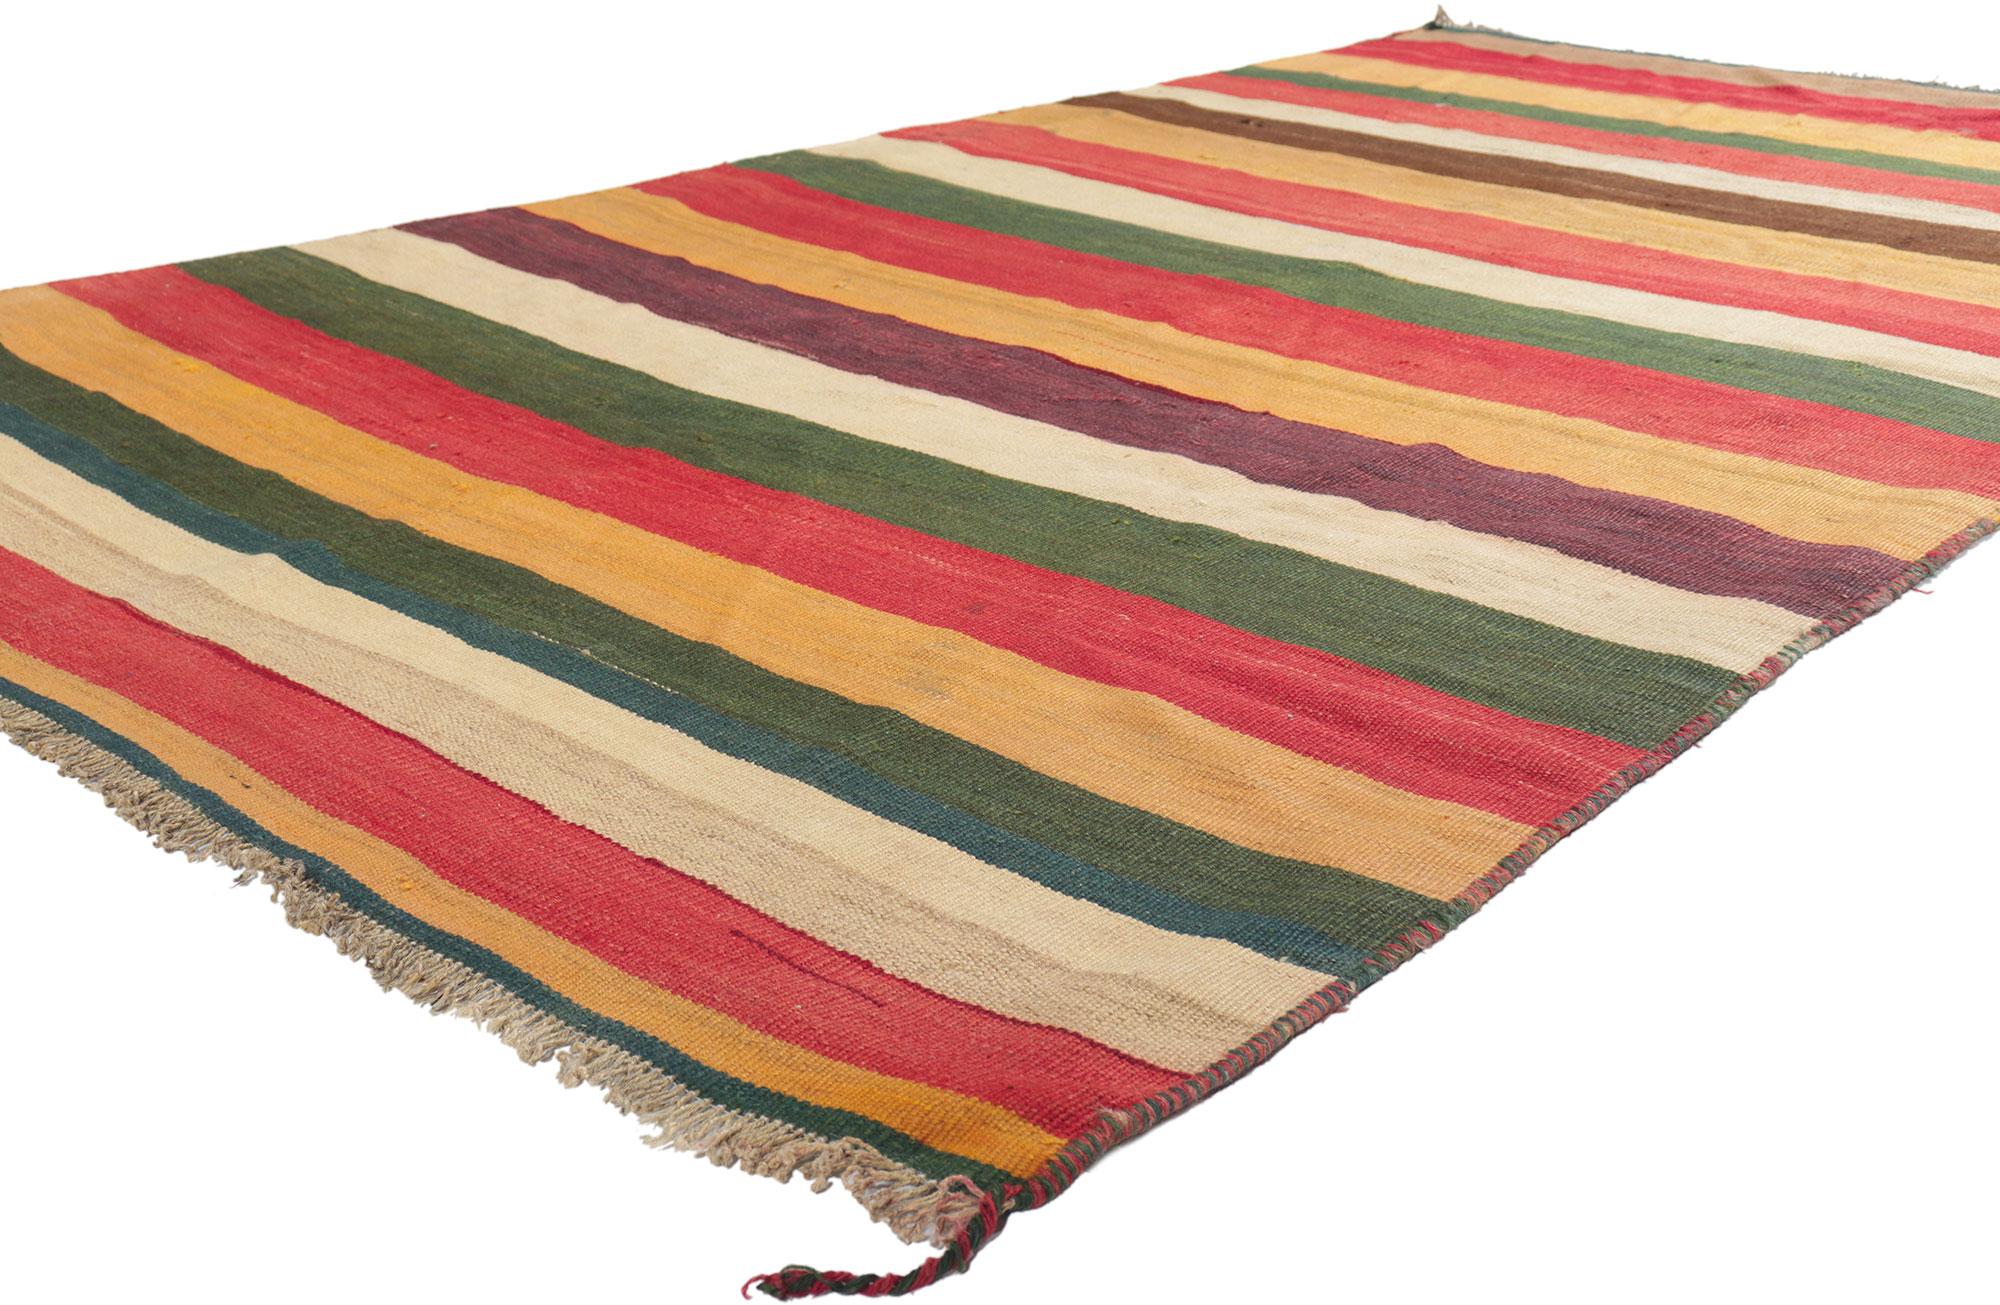 61216 Vintage Turkish Kilim Rug with Stripes, 05'03 x 09'01. With its bold linear design, incredible detail and texture, this handwoven Turkish kilim rug is a captivating vision of woven beauty. The eye-catching striped pattern and lively colors